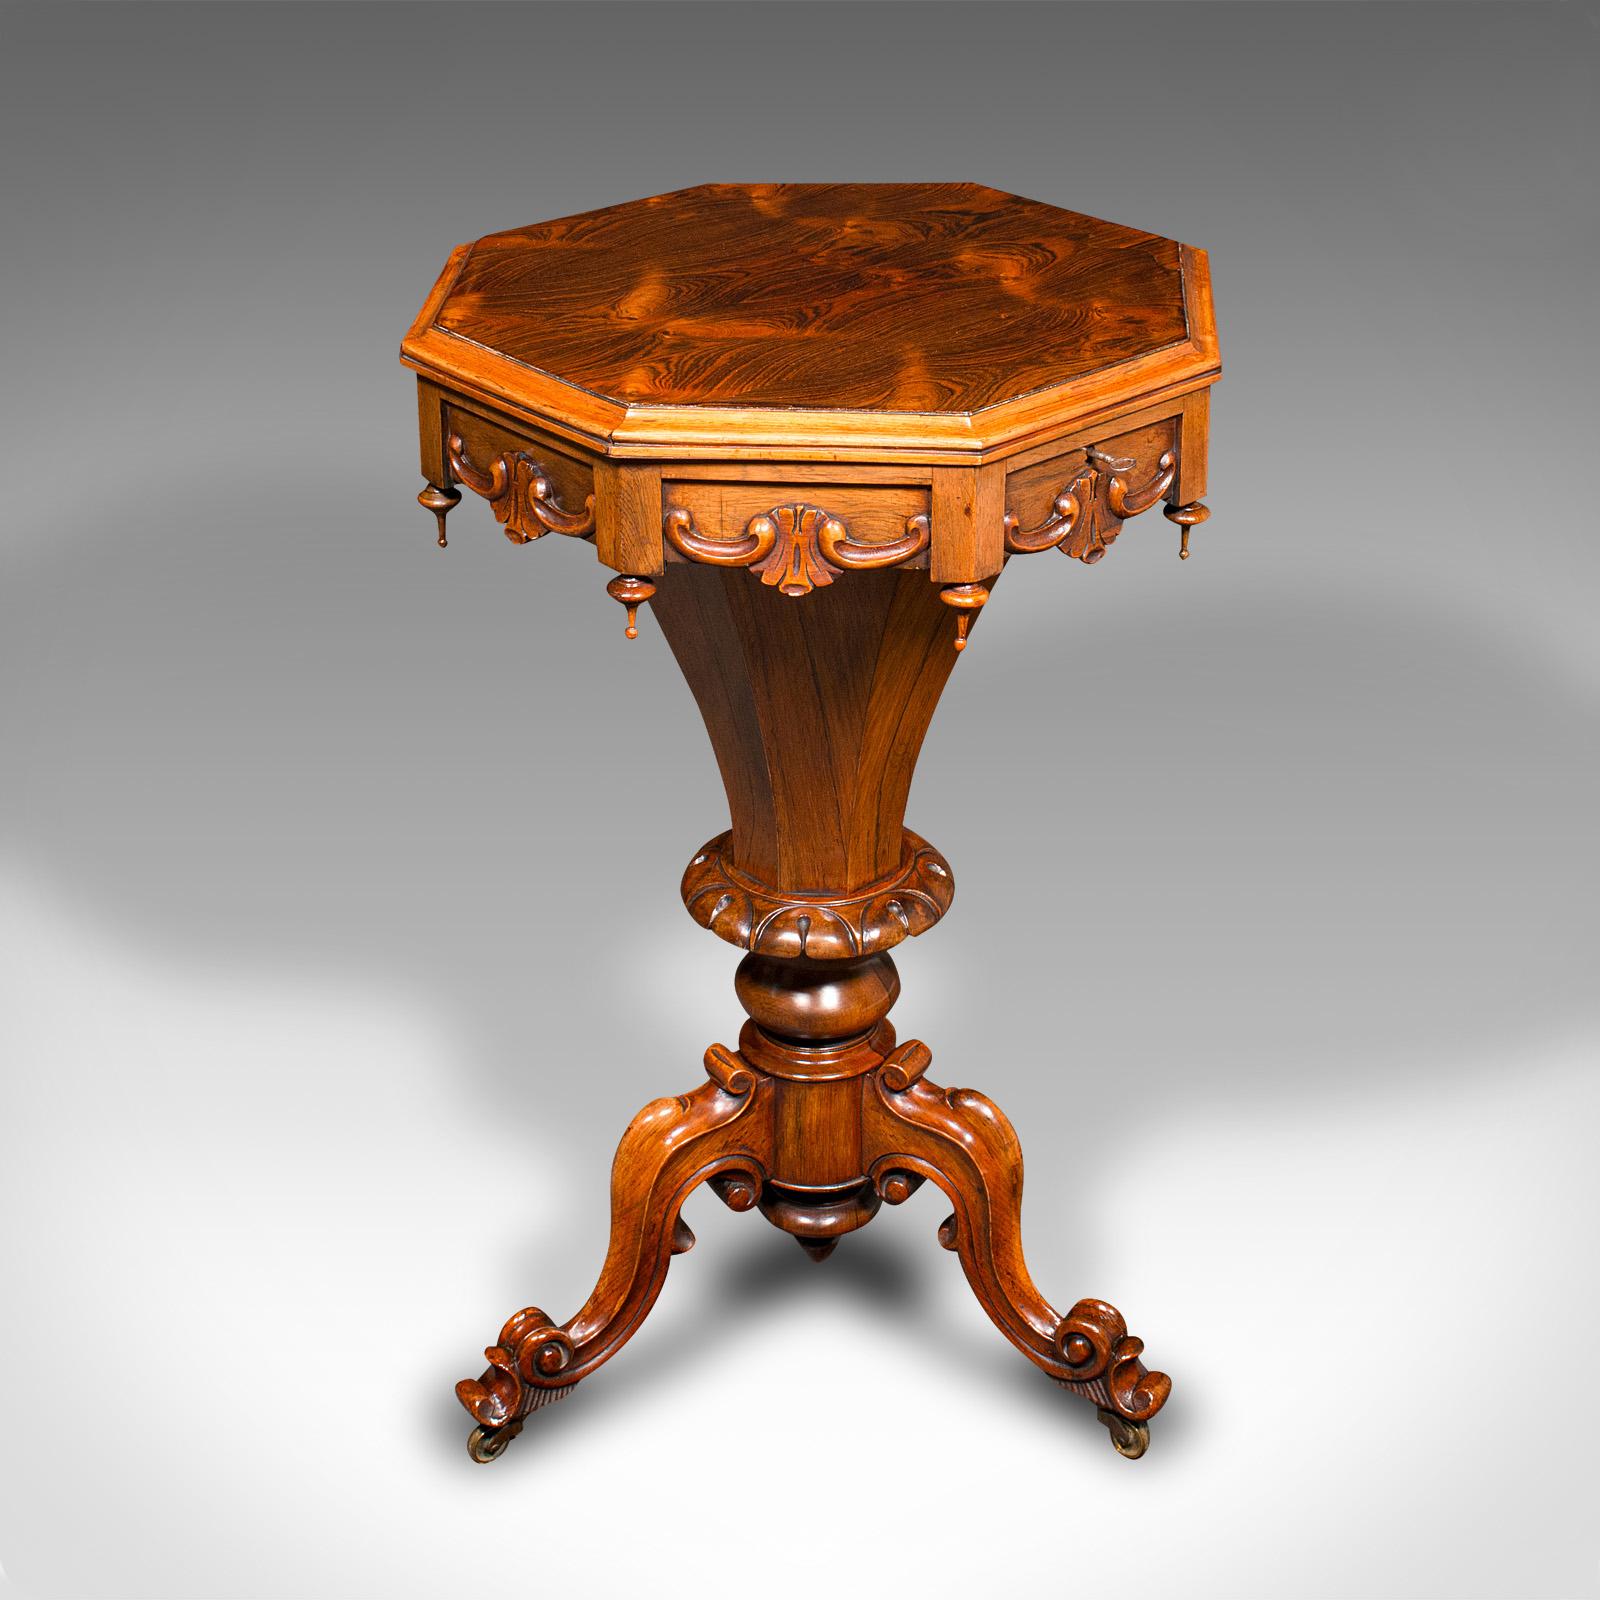 This is an antique trumpet sewing table. An English, rosewood ladies work table, dating to the early Victorian period, circa 1840.

Striking example with a fine appearance and vibrant interior finish
Displaying a desirable aged patina and in very